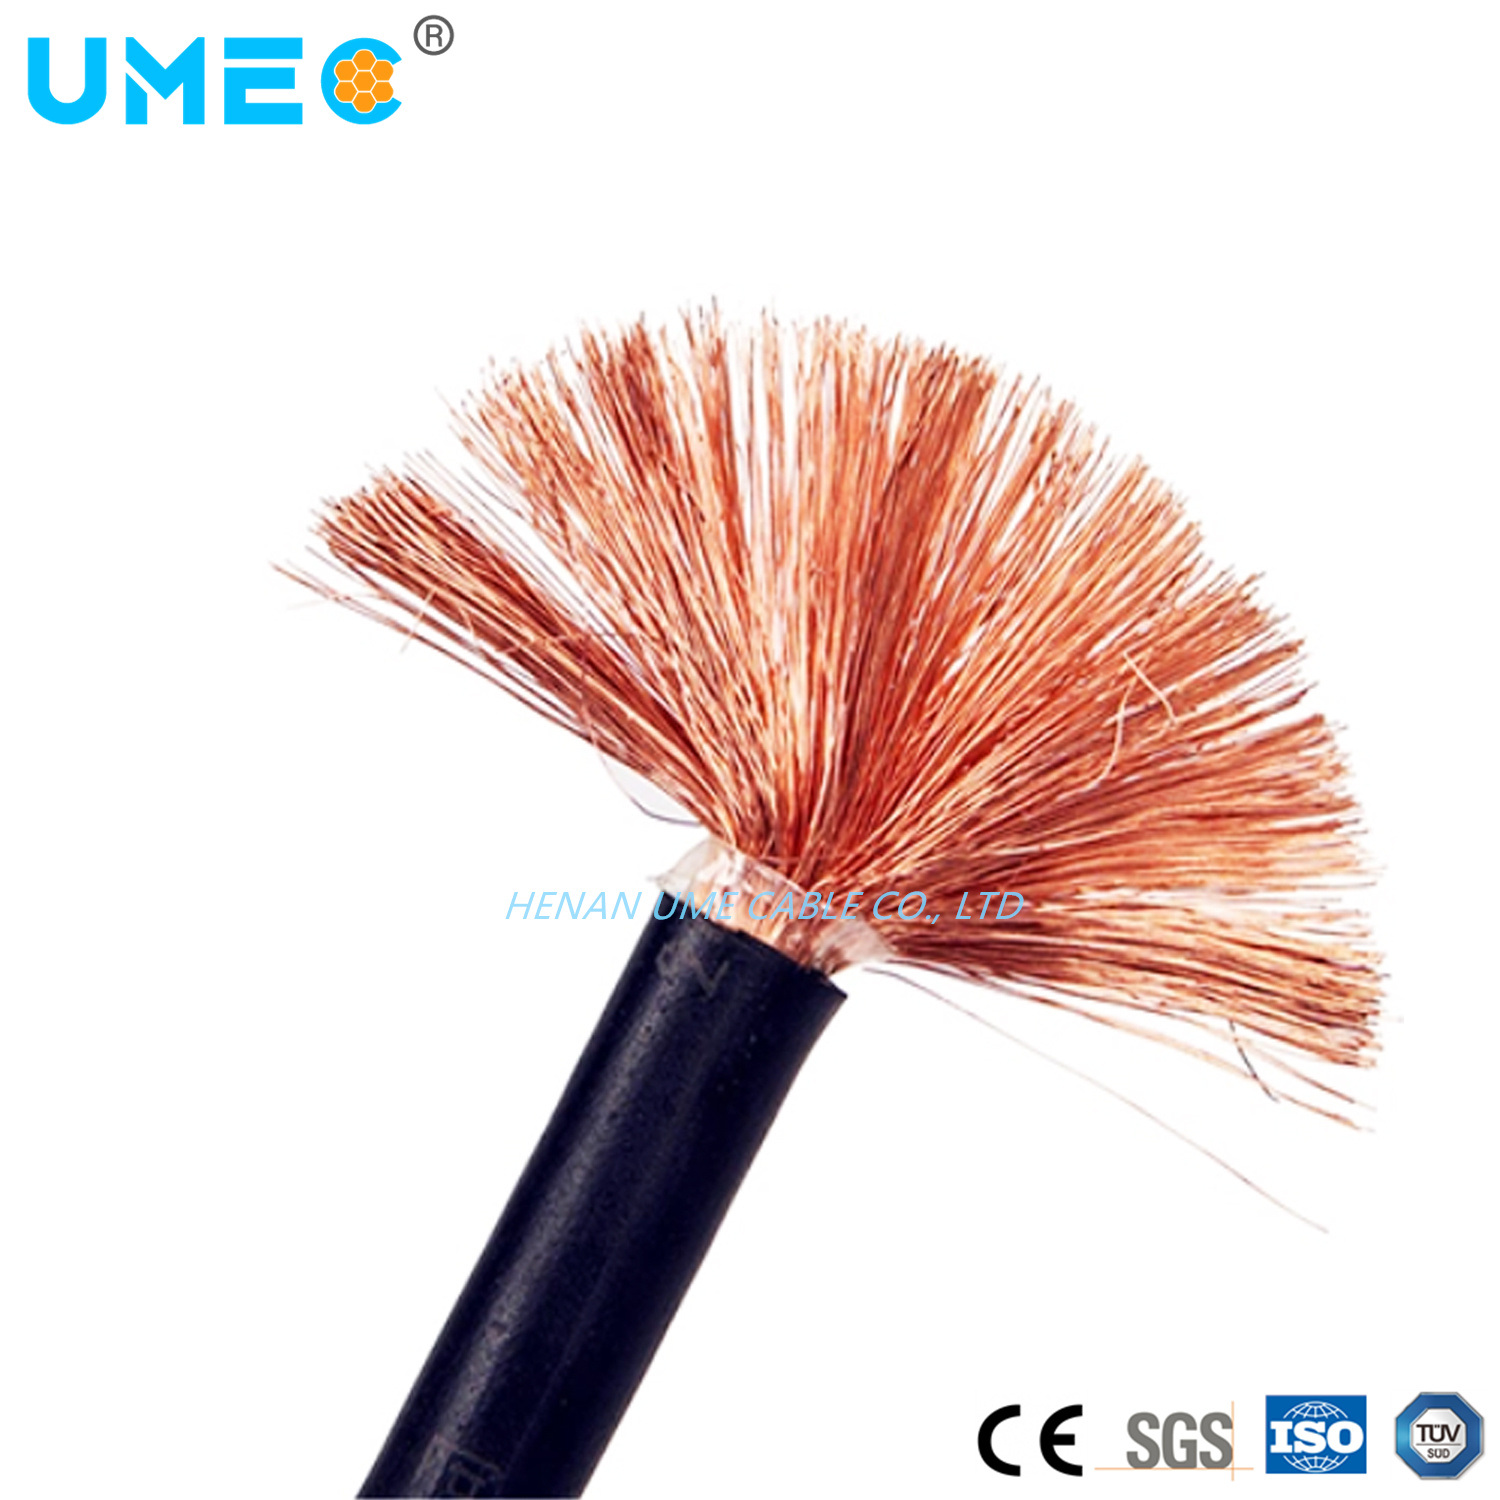 IEC60332 Ho1n2-D Cable Class 5 Conductor Neoprene Arc Welding Cable 95mm2 up to 120mm2 Welding Cable